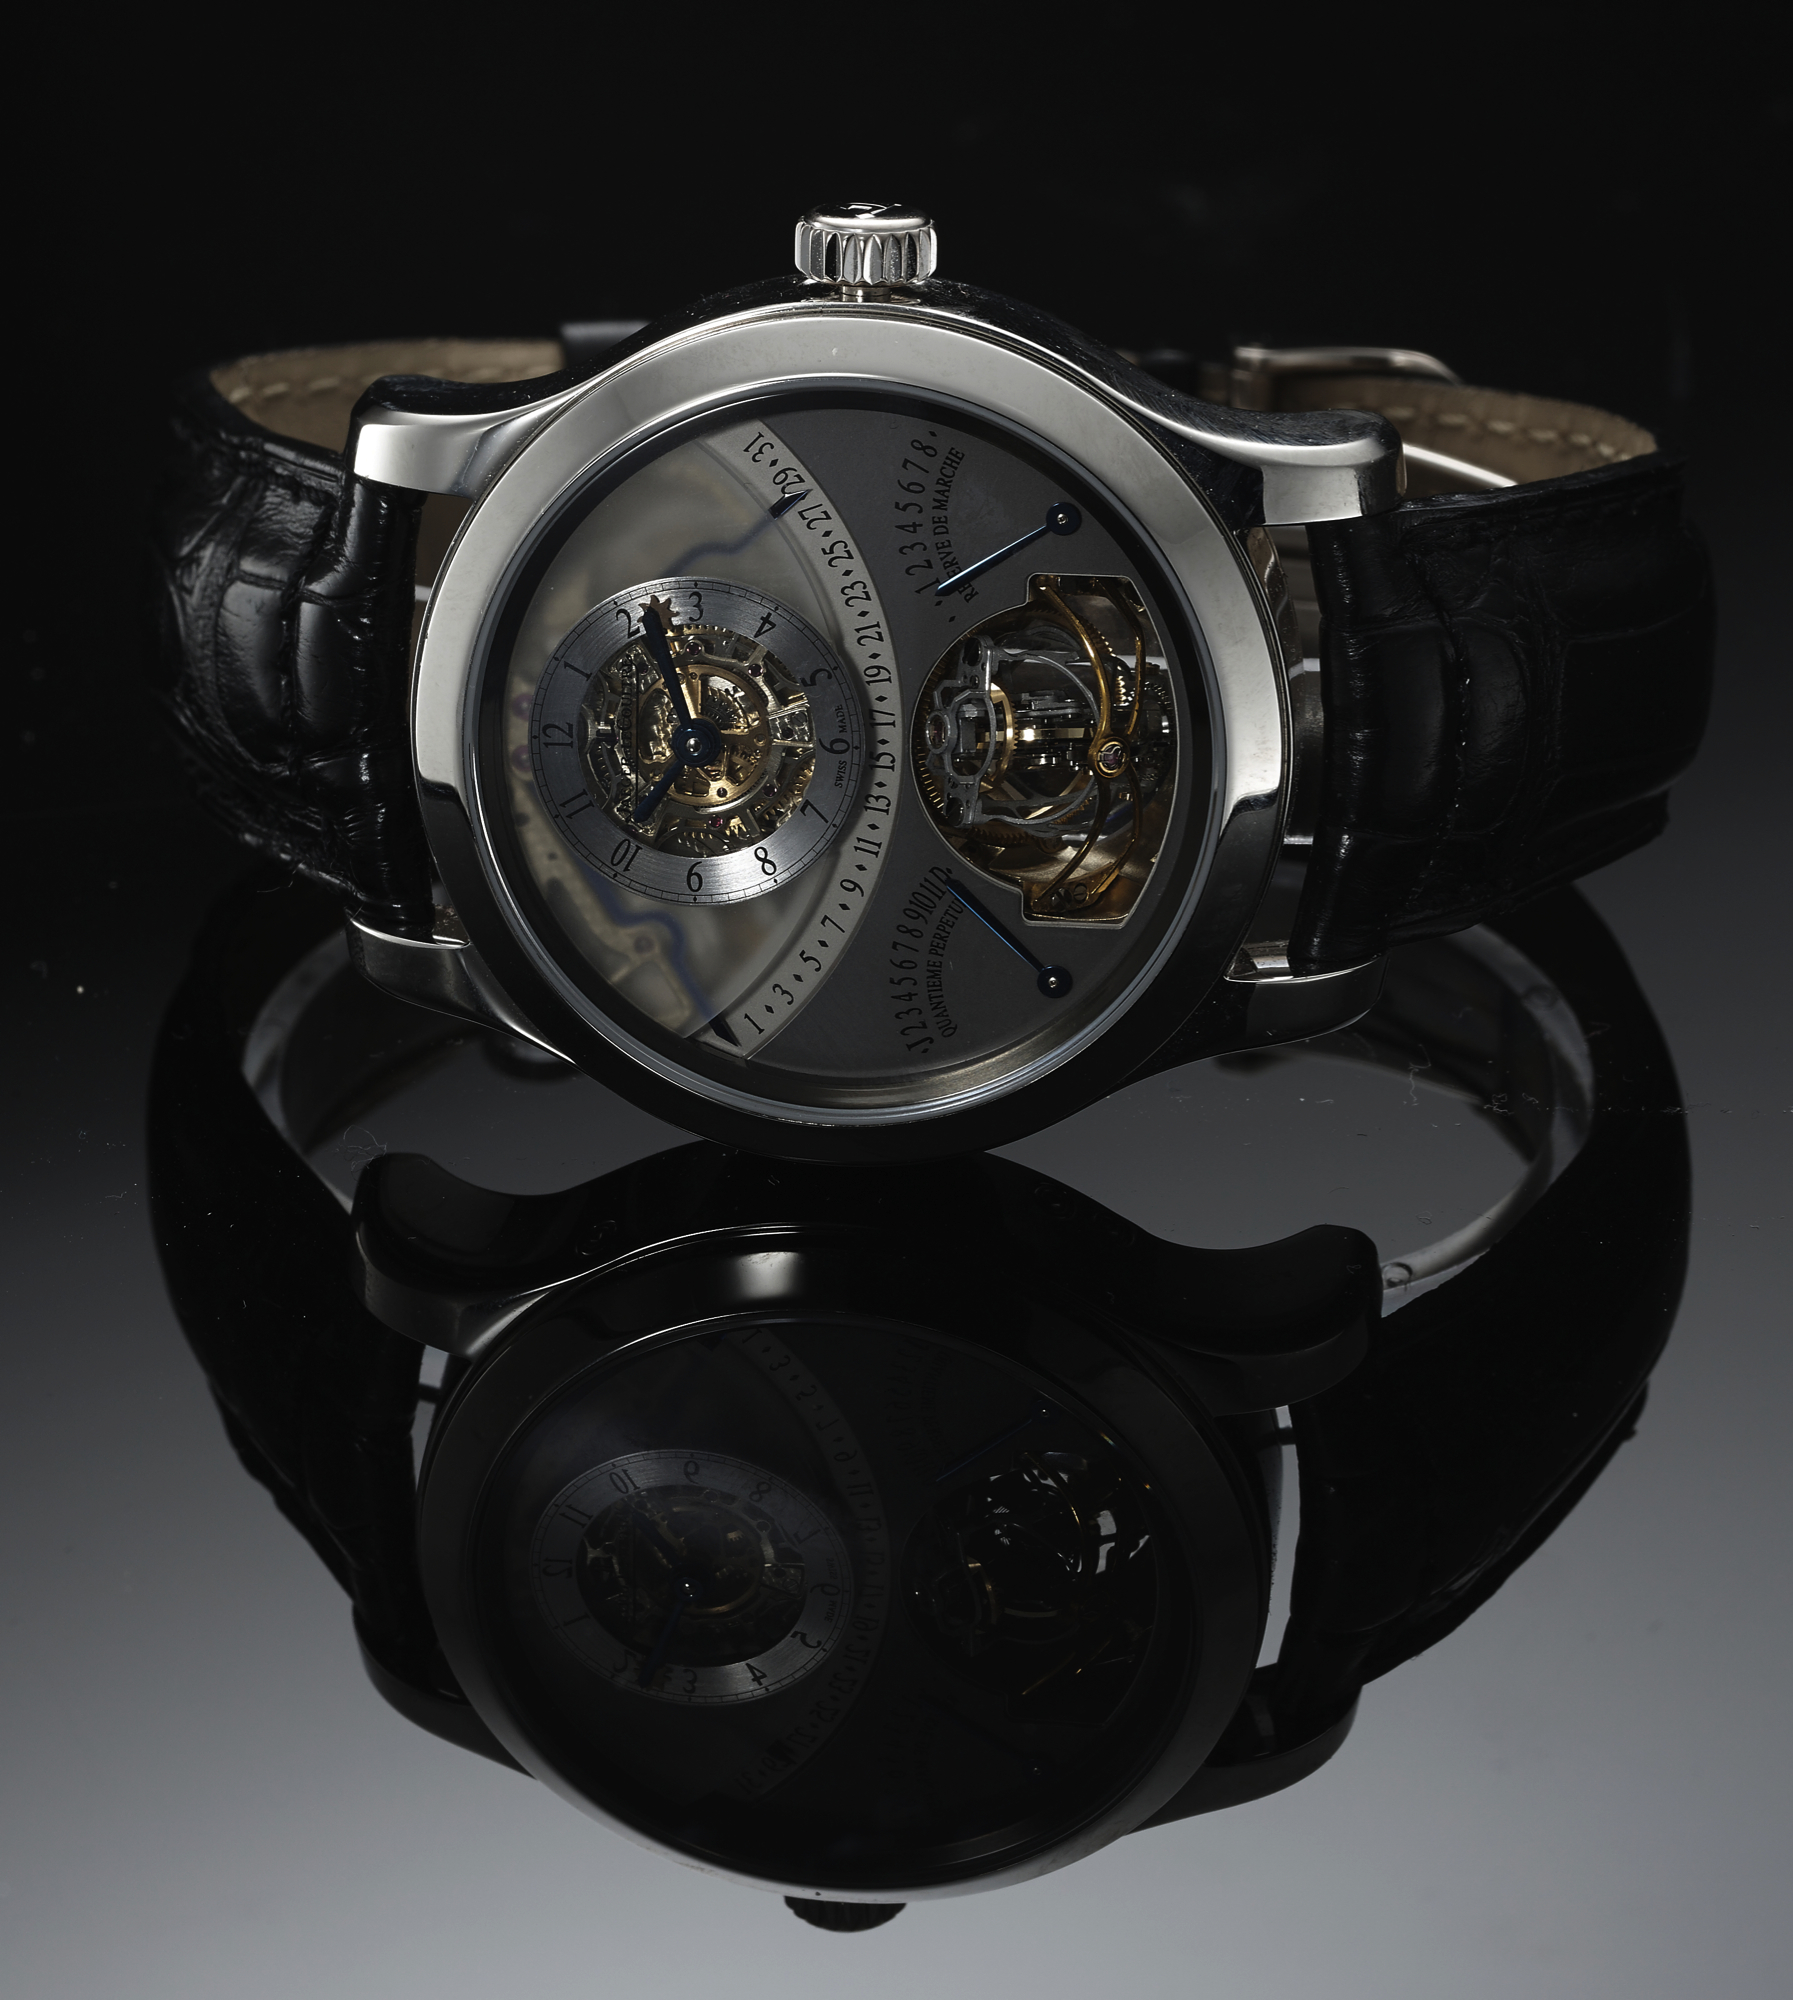 Rare Patek Philippe and Jaeger-LeCoultre Watches Fetch $29,000,000 at Auction in Hong Kong